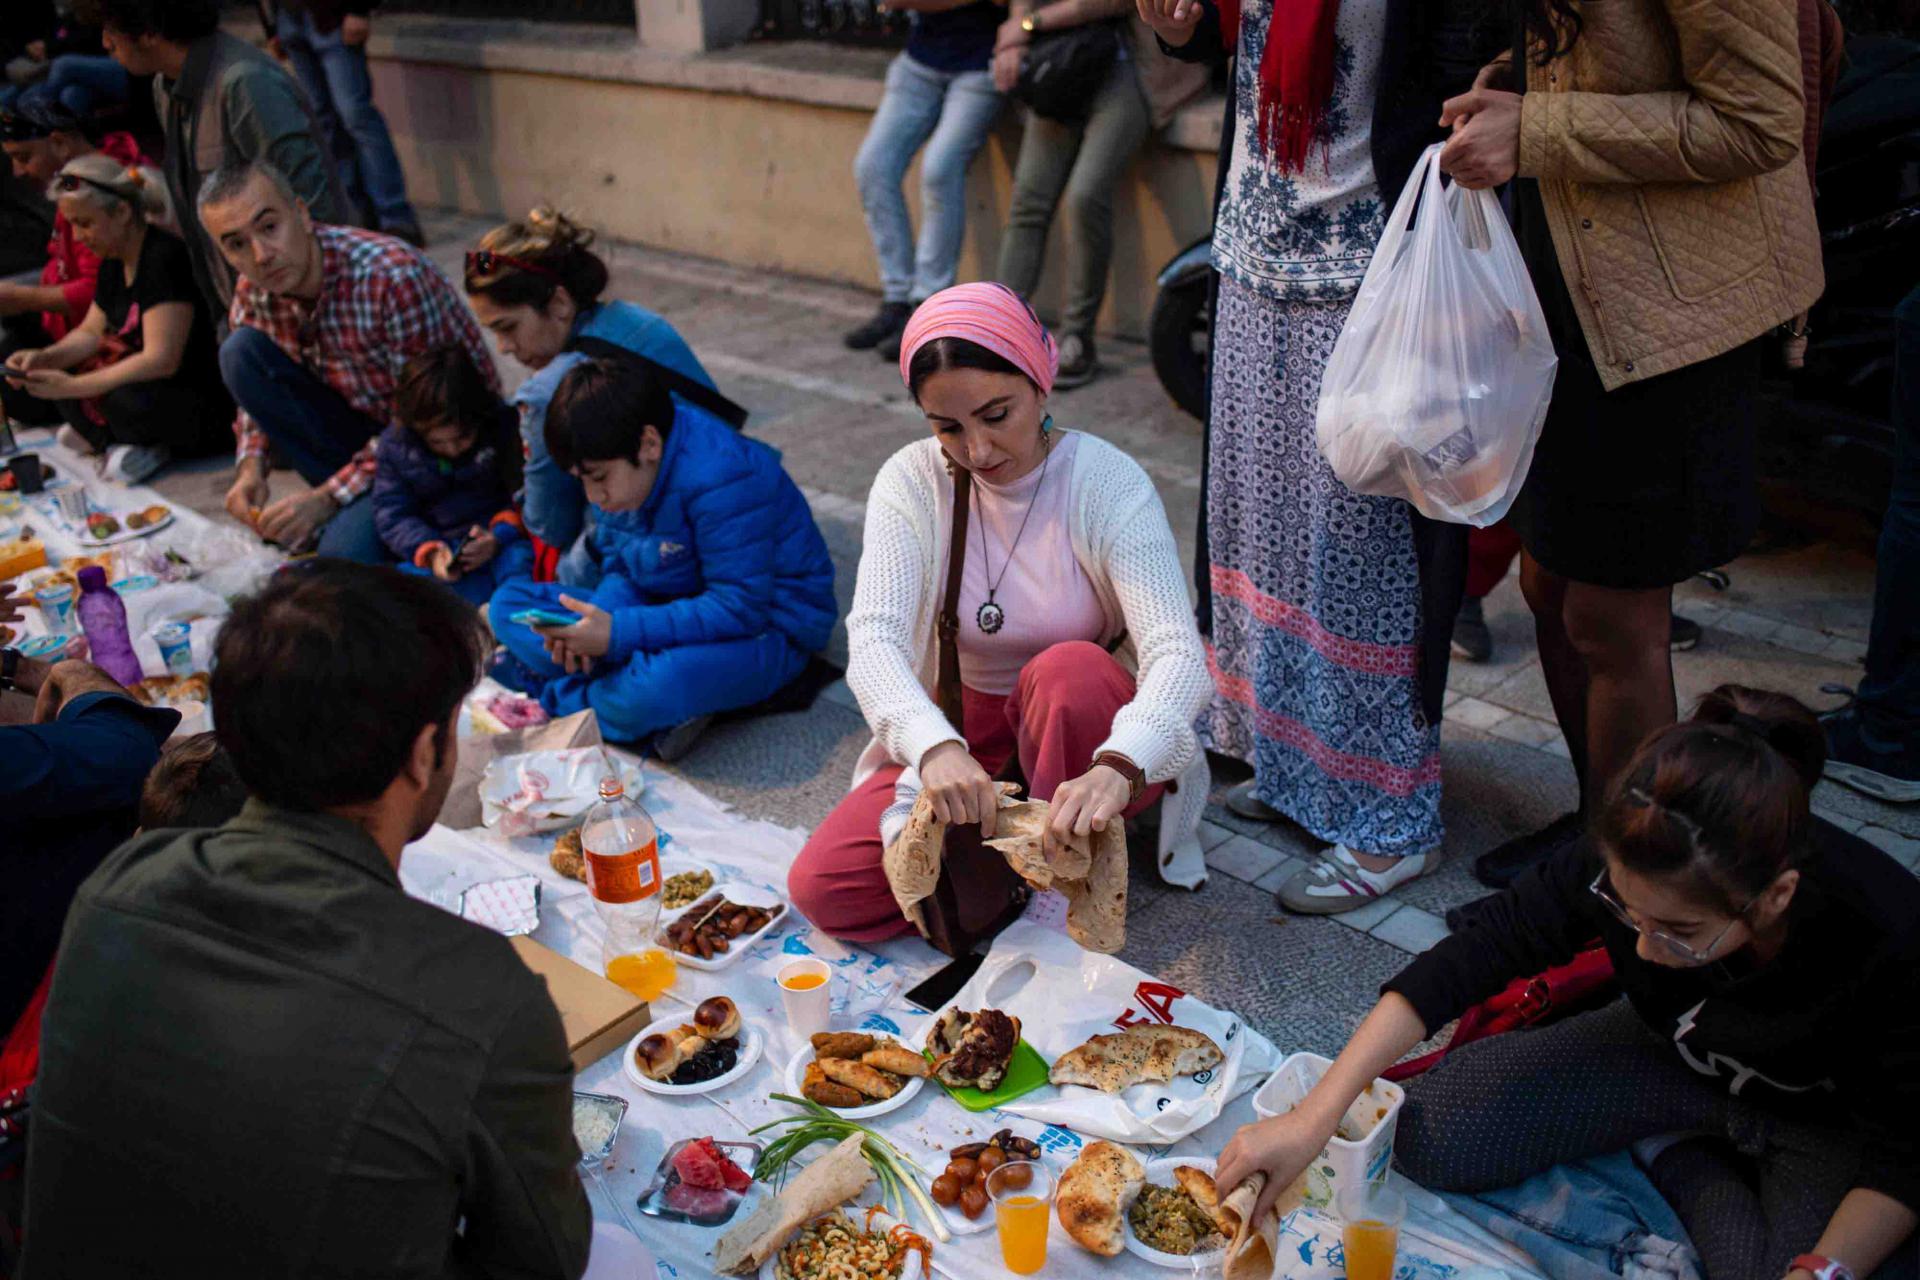 Tens of thousands of people take part in “Dinner on the Ground” meetings